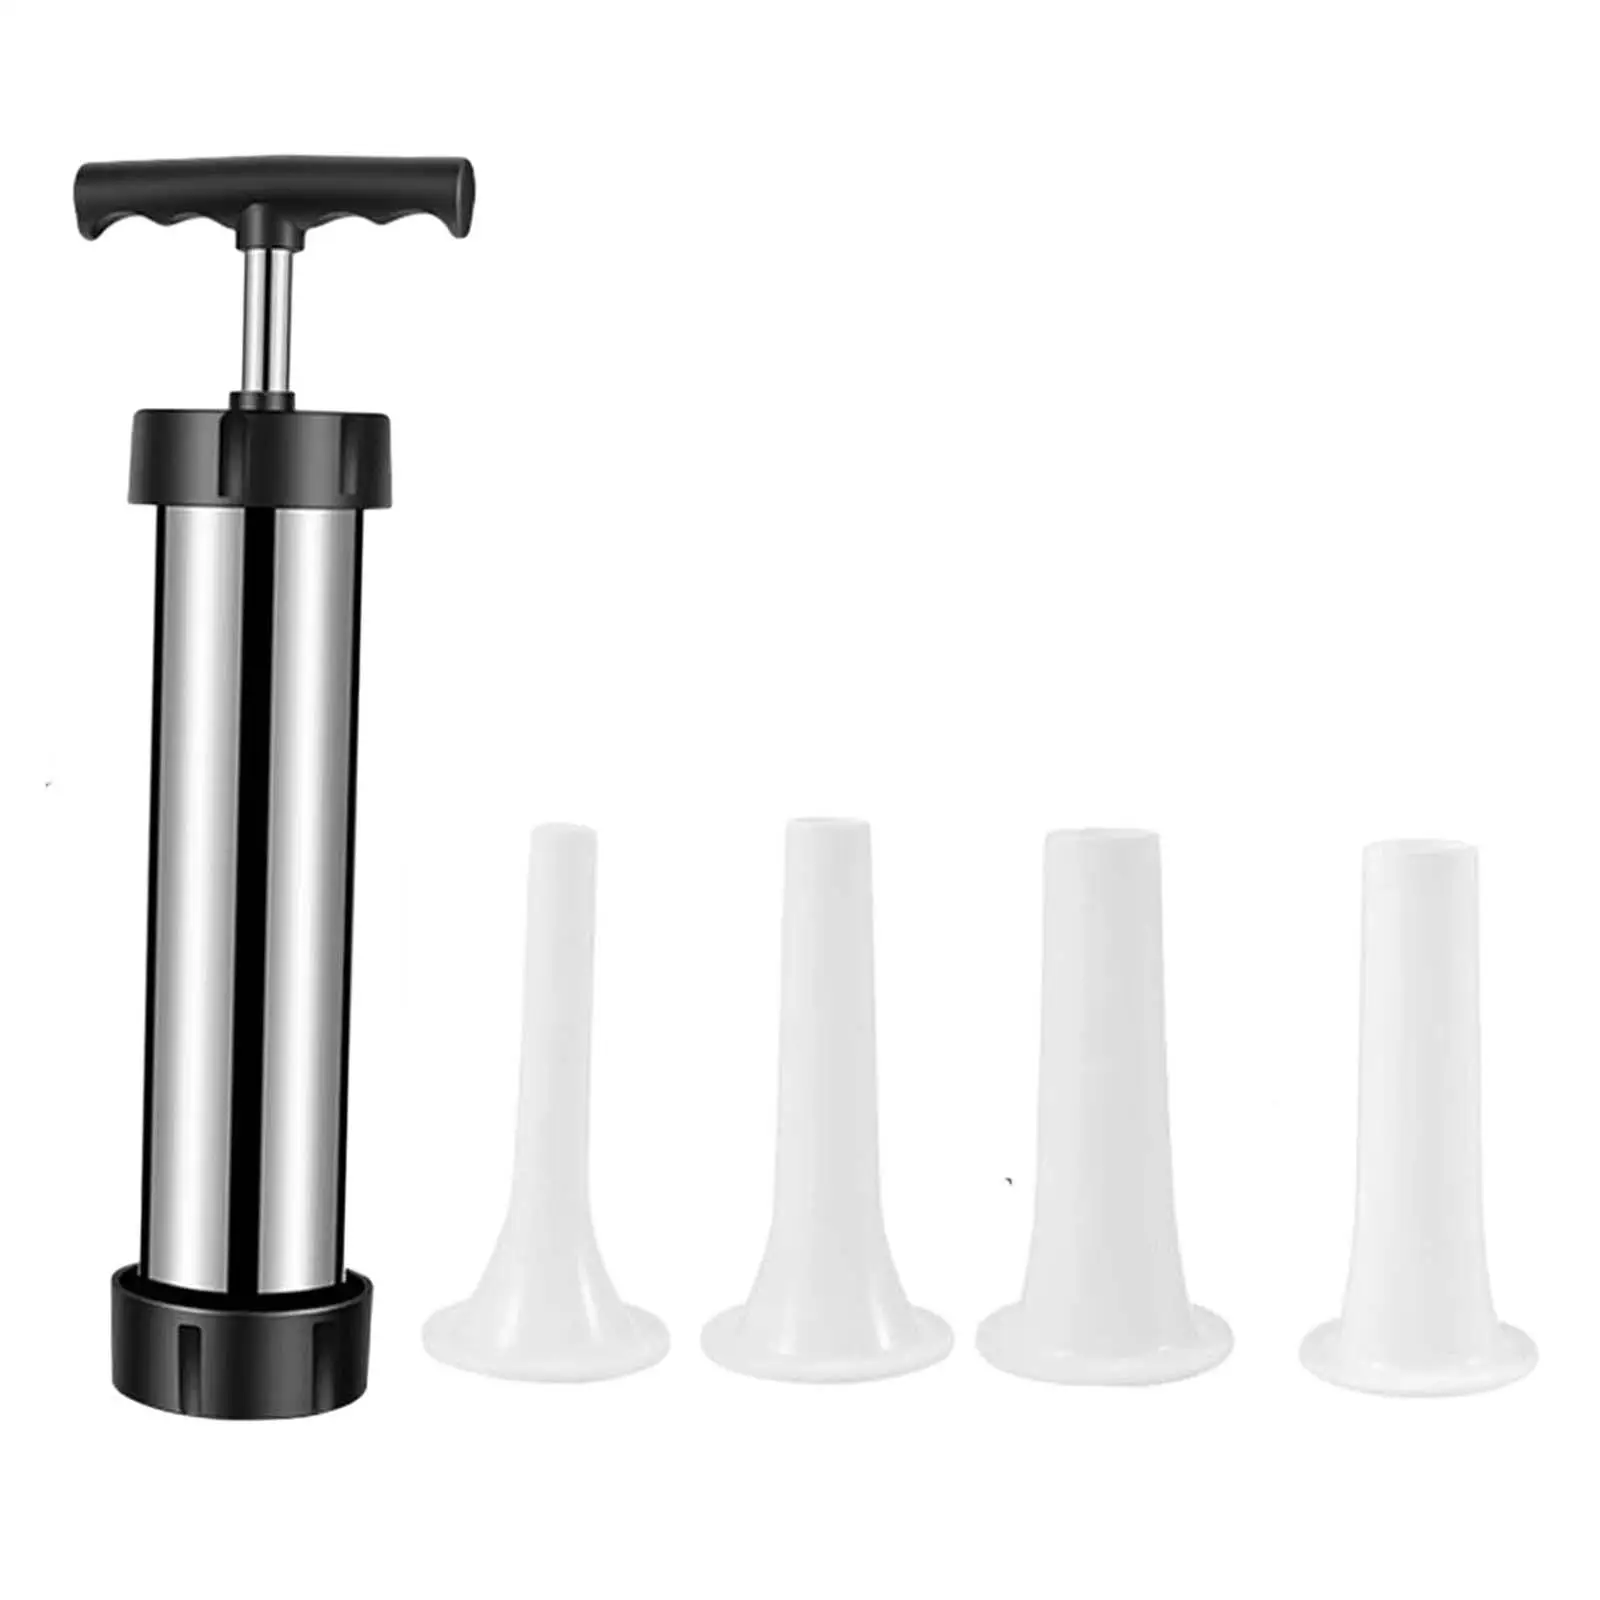 Sausage Stuffer Machine for Home with 4 Filling Nozzles Attachment 4 Sausage Nozzle Attachments Portable Sausage Filling Tools